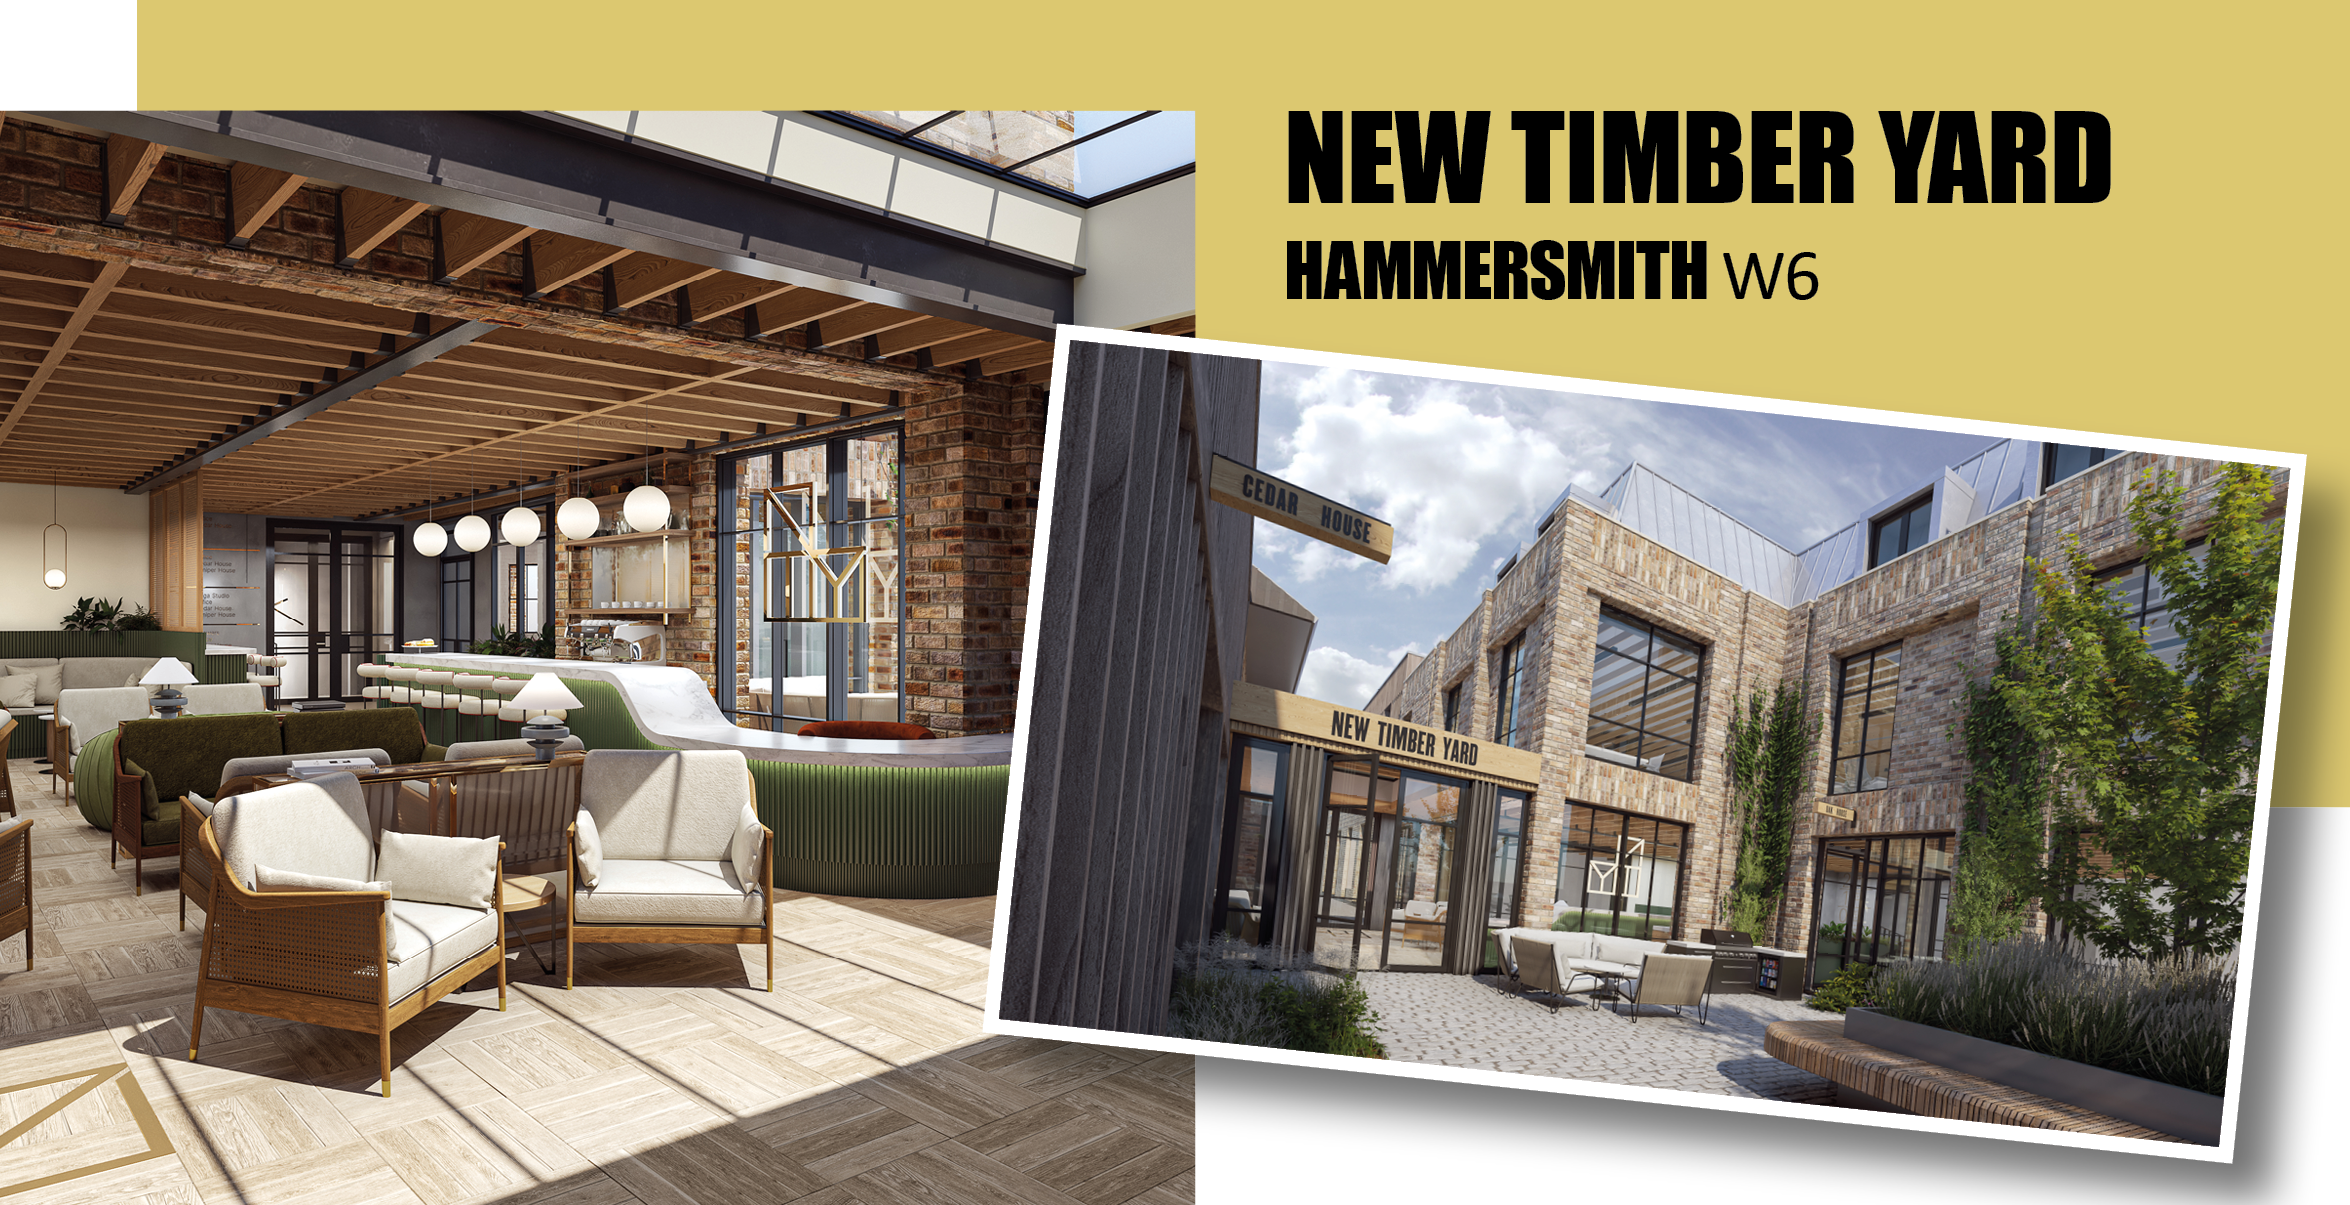 New Timber Yard, what's new